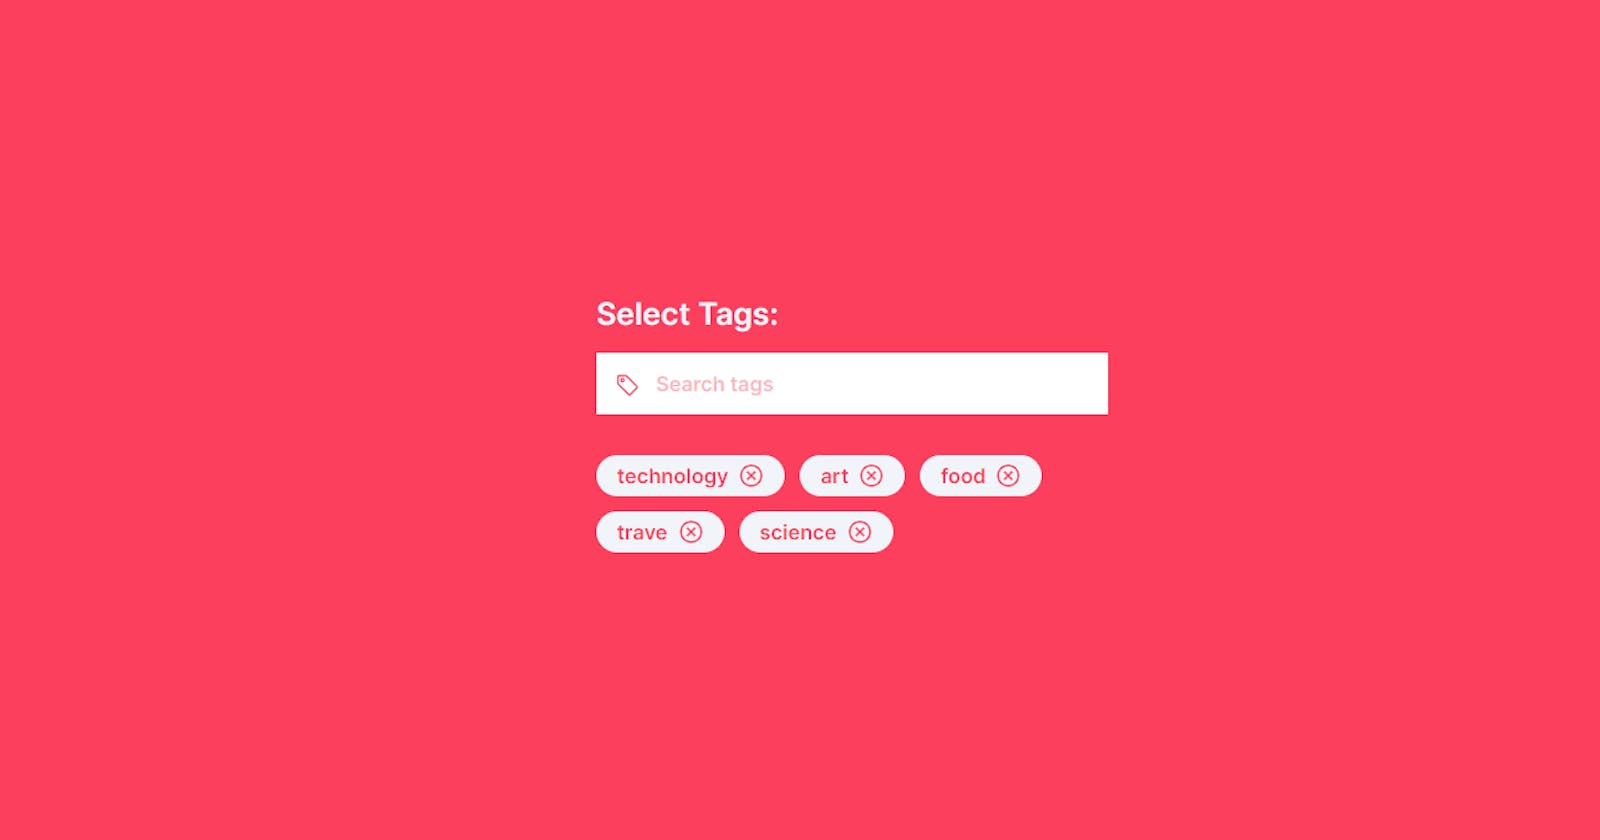 Building an Interactive Tag Selector Component in React